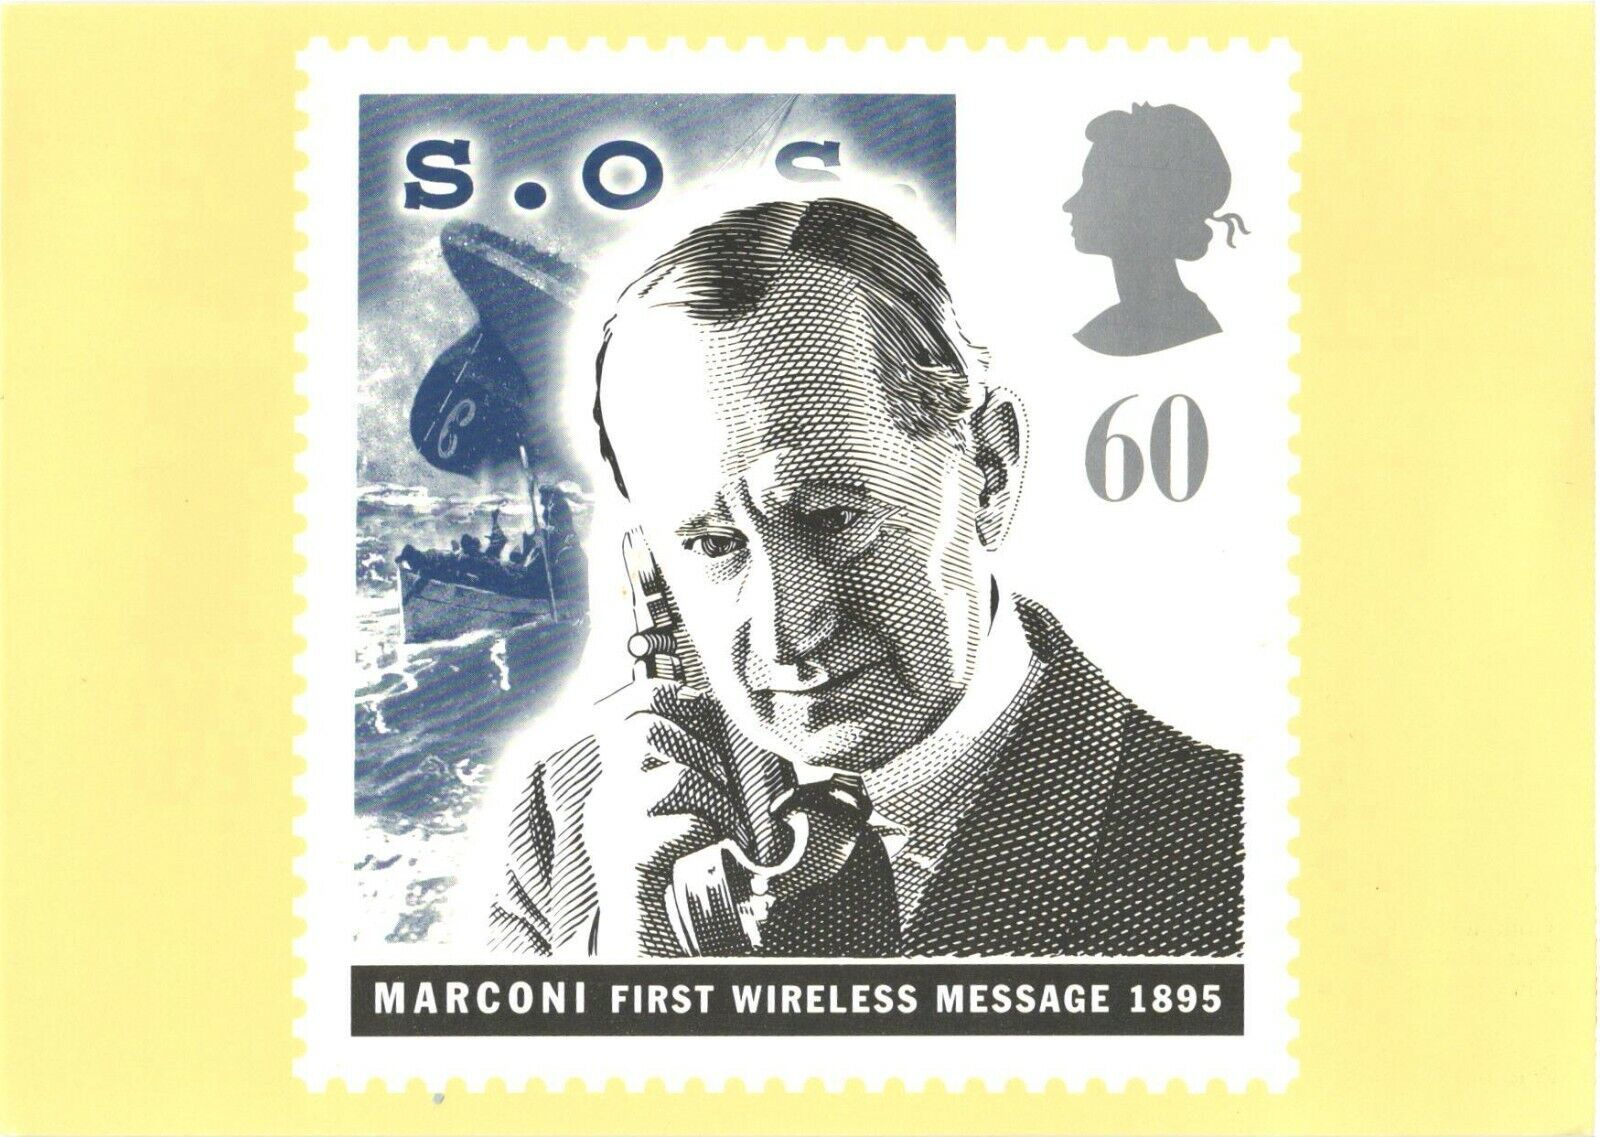 Communications, Marconi First Wireless Message 1895, Stamp, Royal Mail Postcard